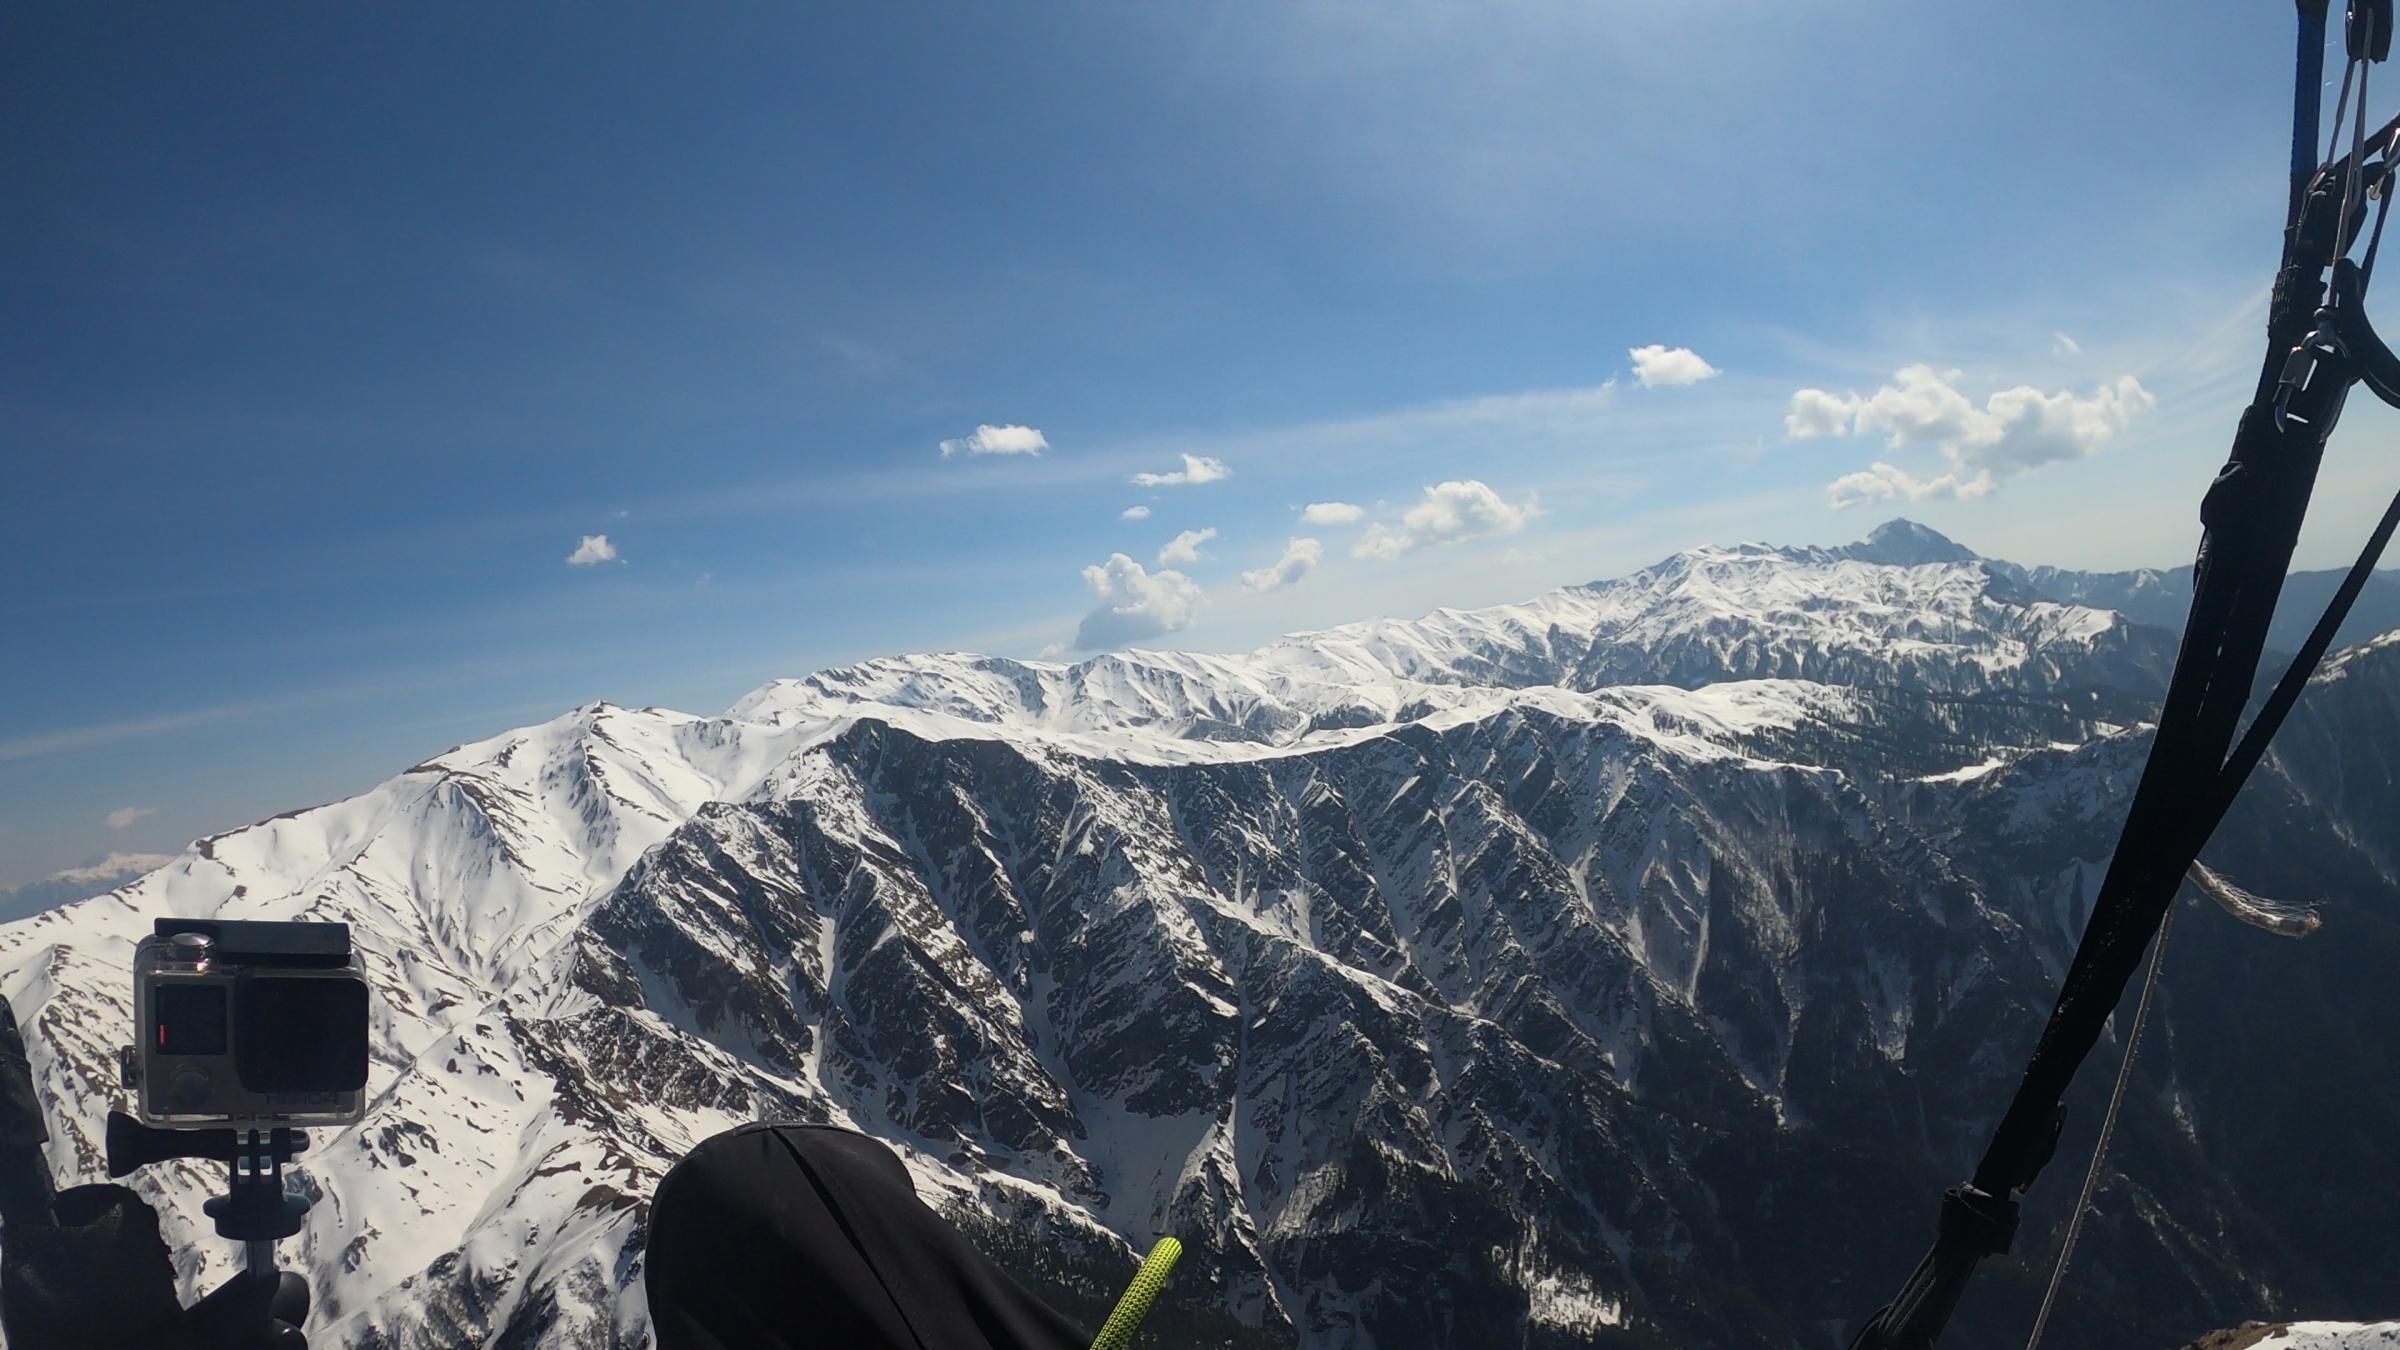 Paraglider Steven Mackintosh was flying over Nepals Himalayas